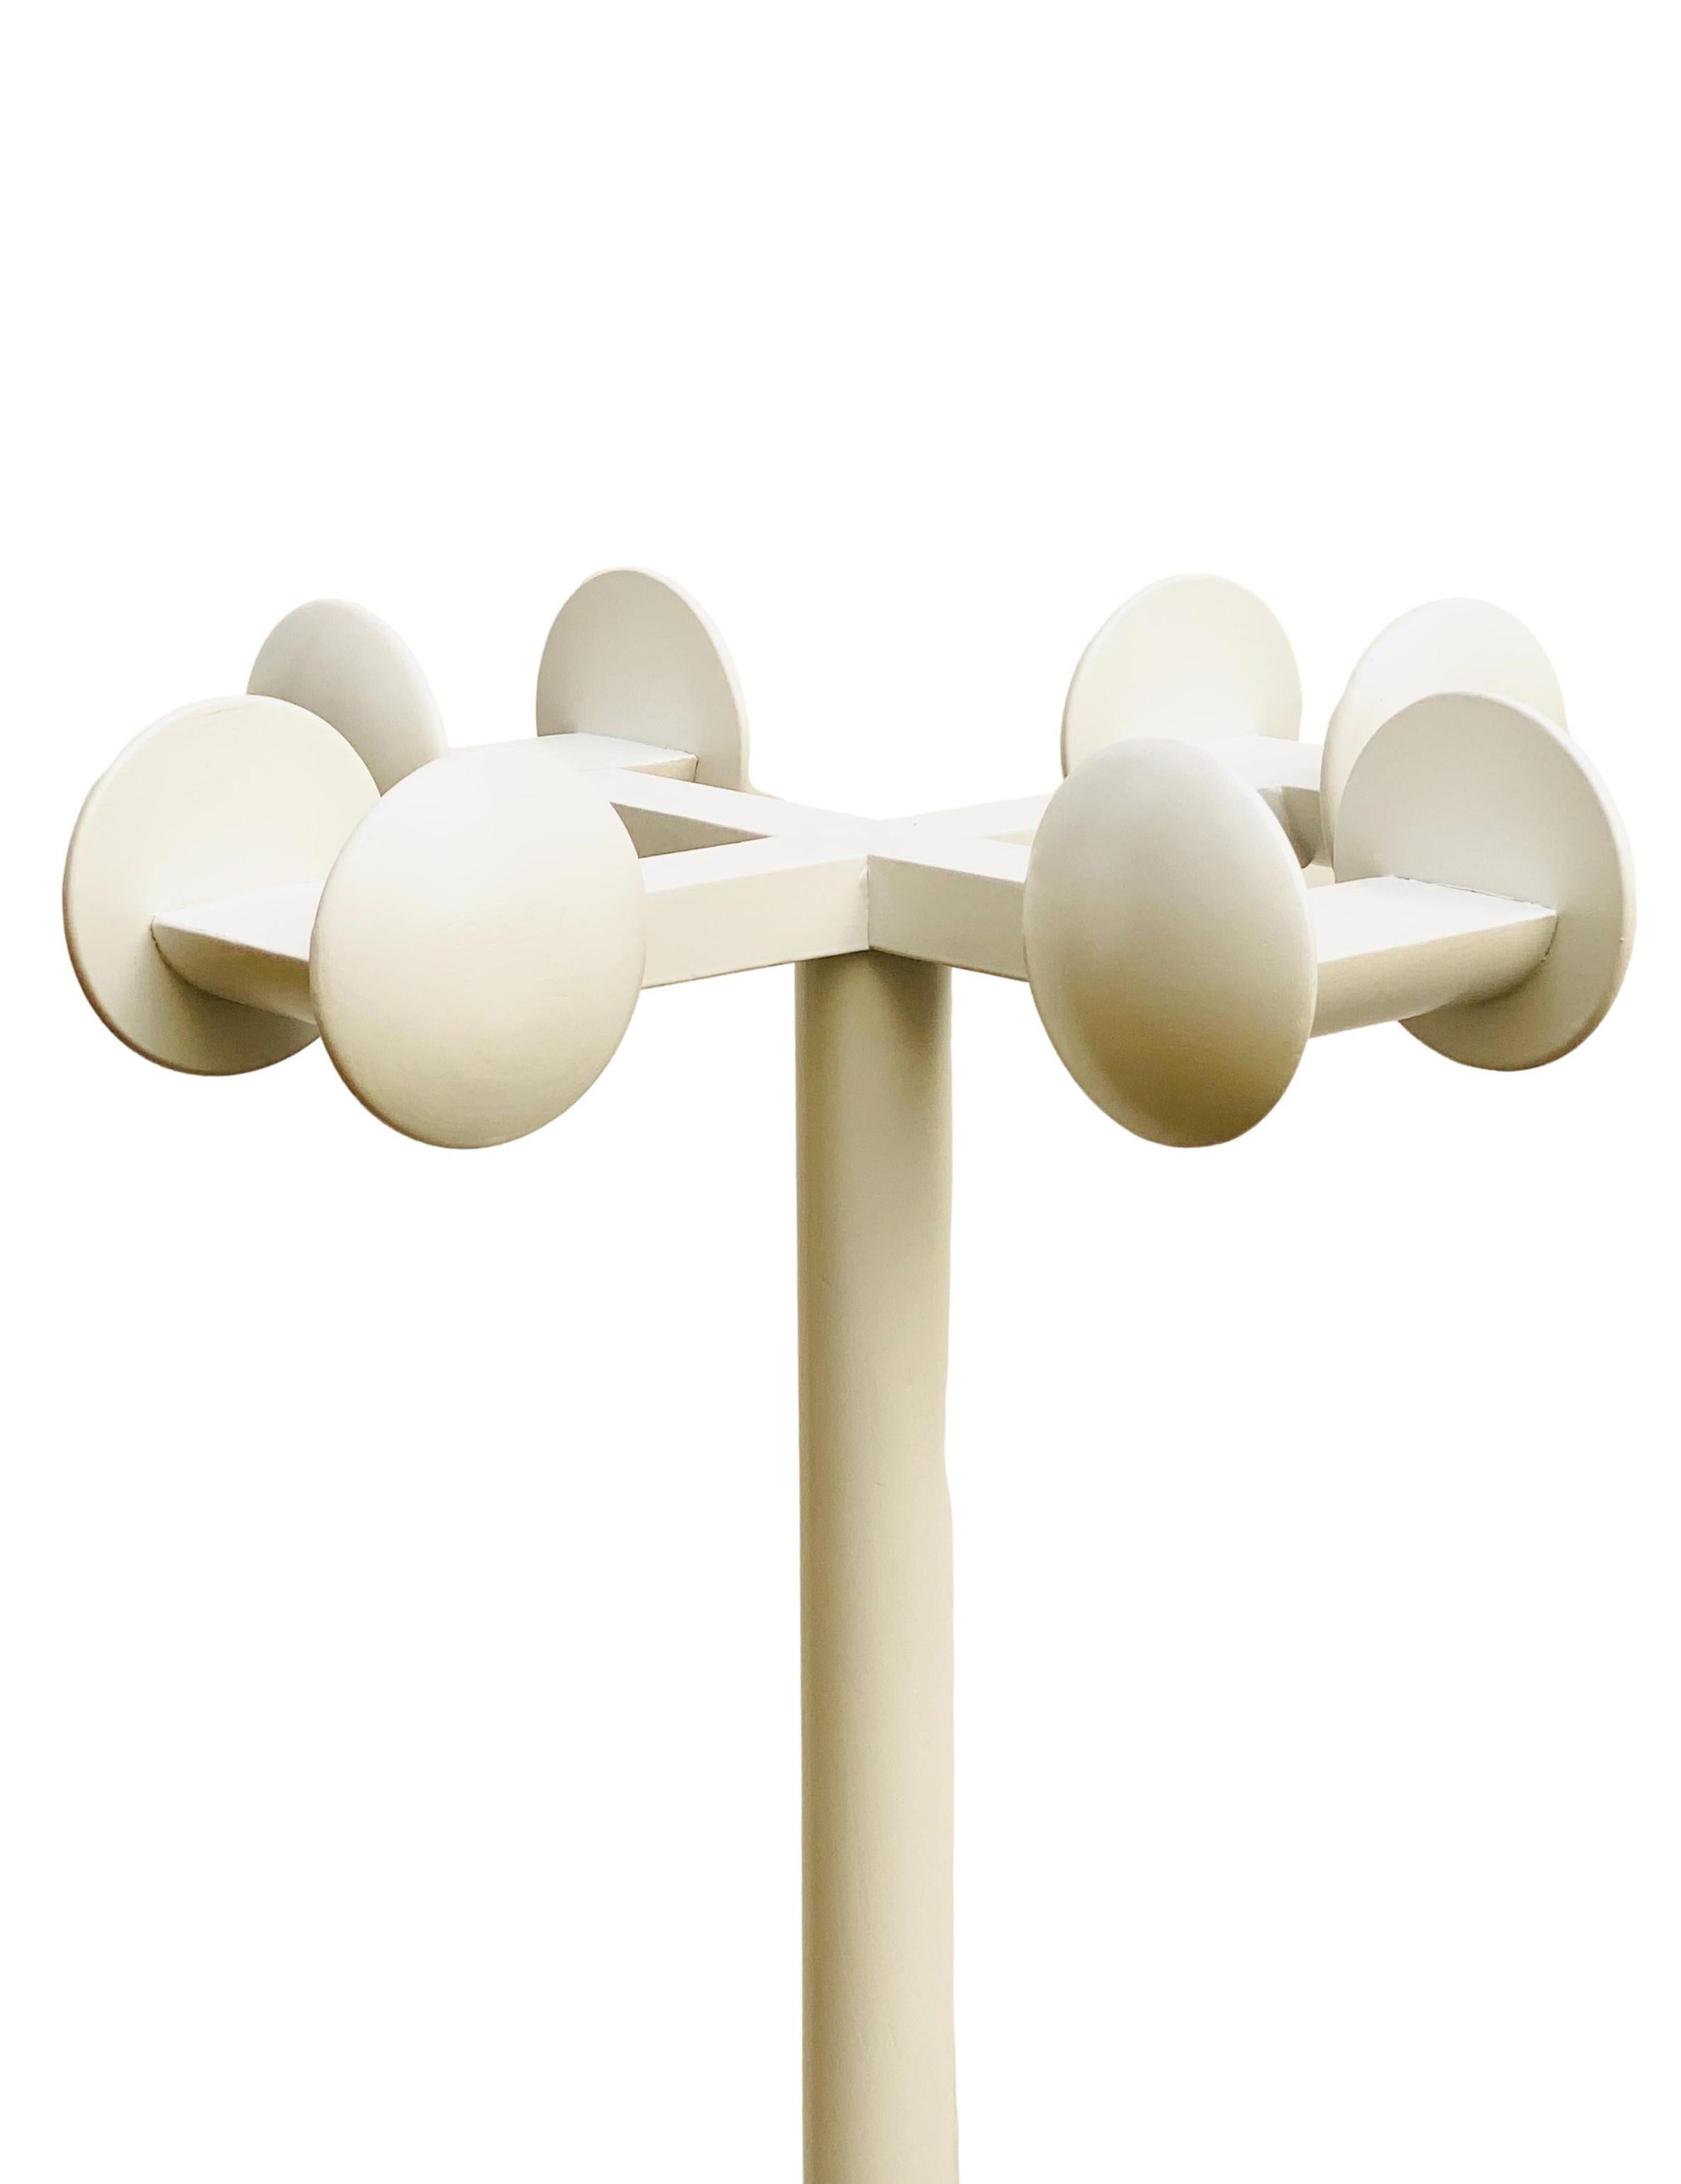 Italian Modern White Lacquered Wood Coat Rack, Italy, 1970s For Sale